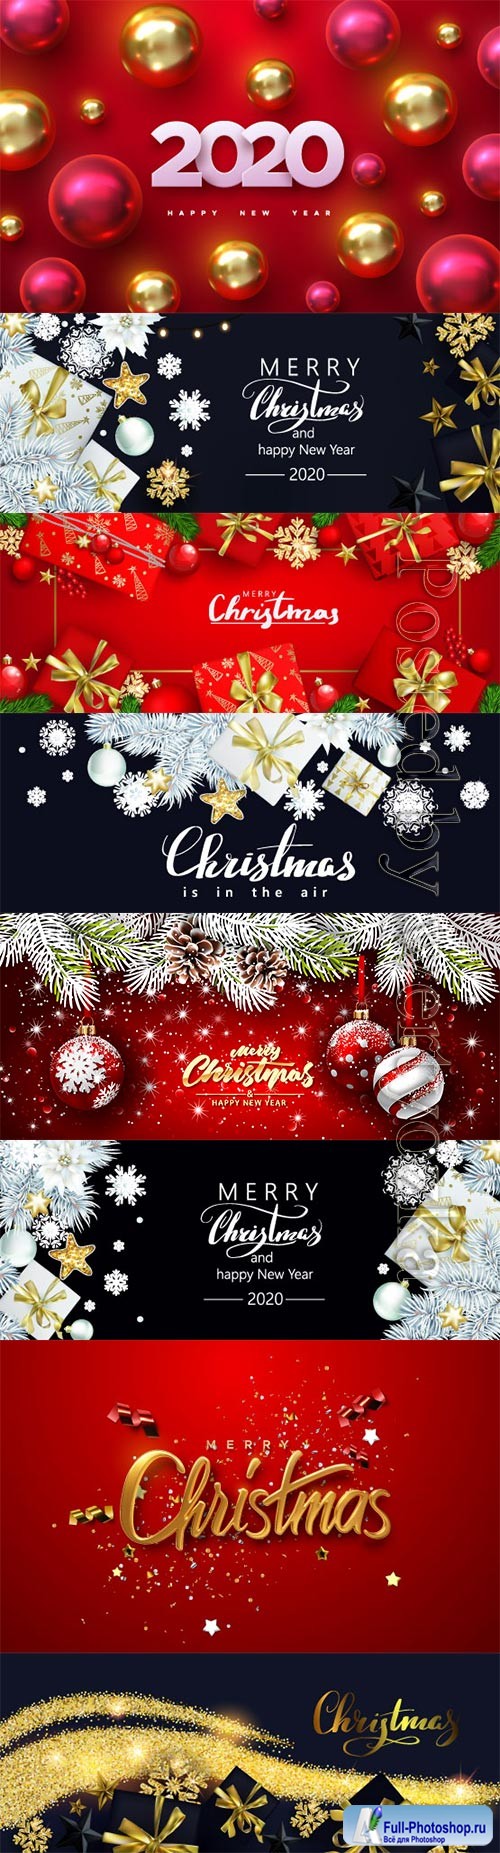 Christmas banner with gift boxes and golden snowflakes